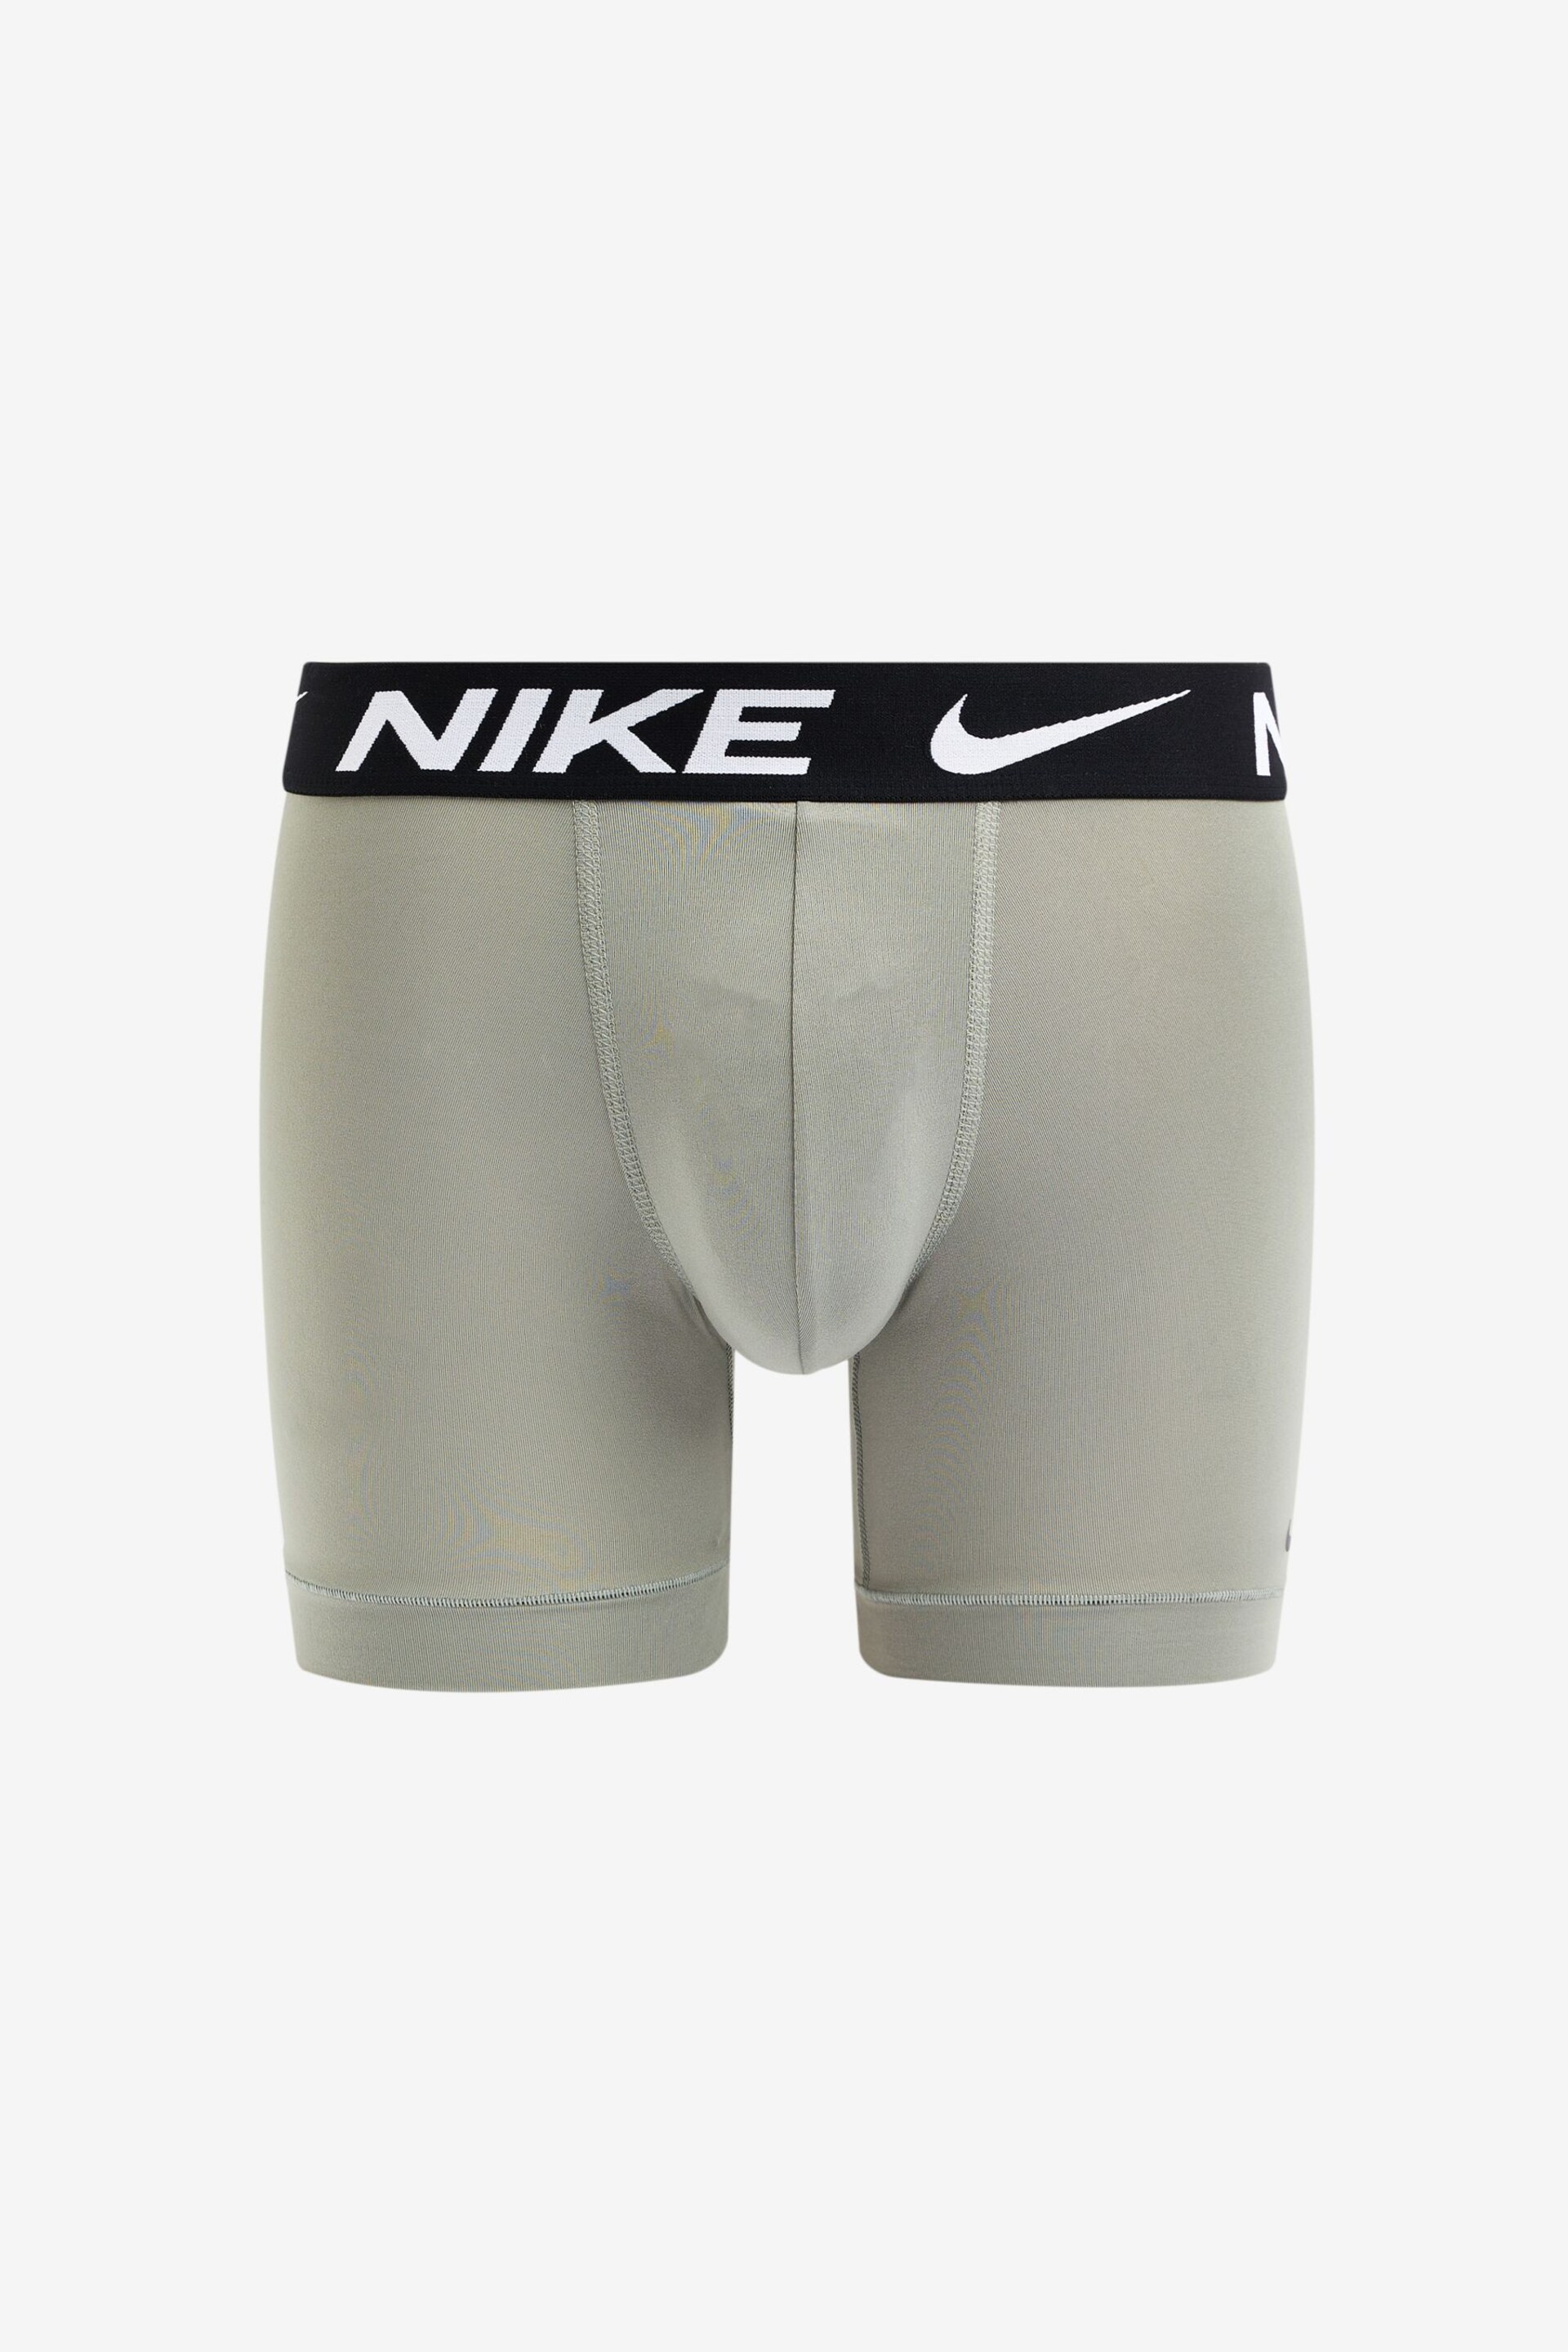 Nike Blue Boxer 3 Pack - Image 4 of 4